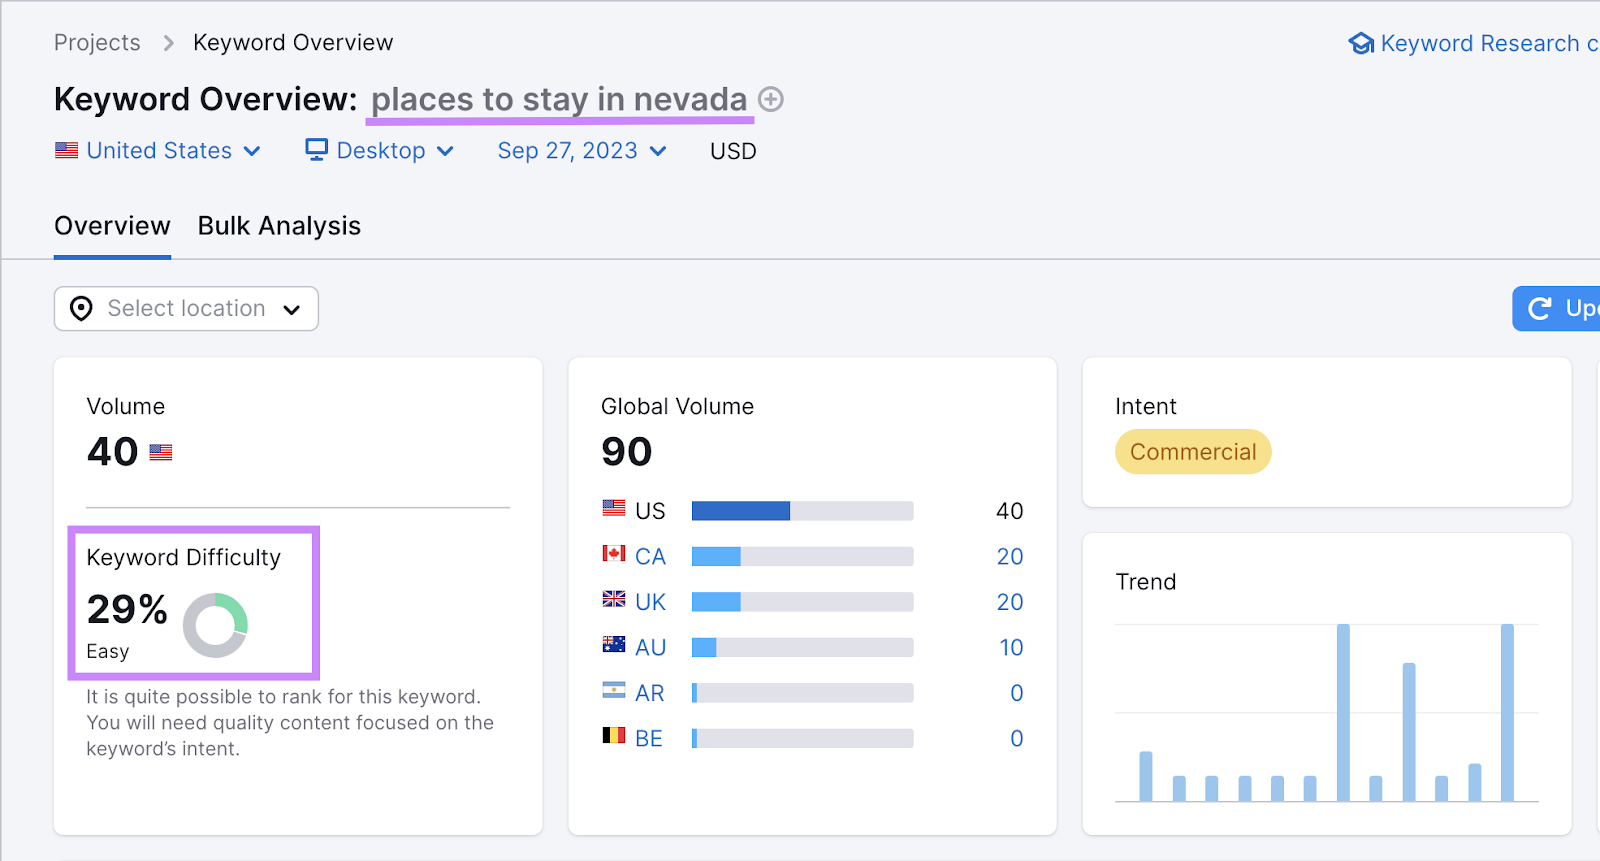 Keyword Overview report for “places to stay in Nevada”